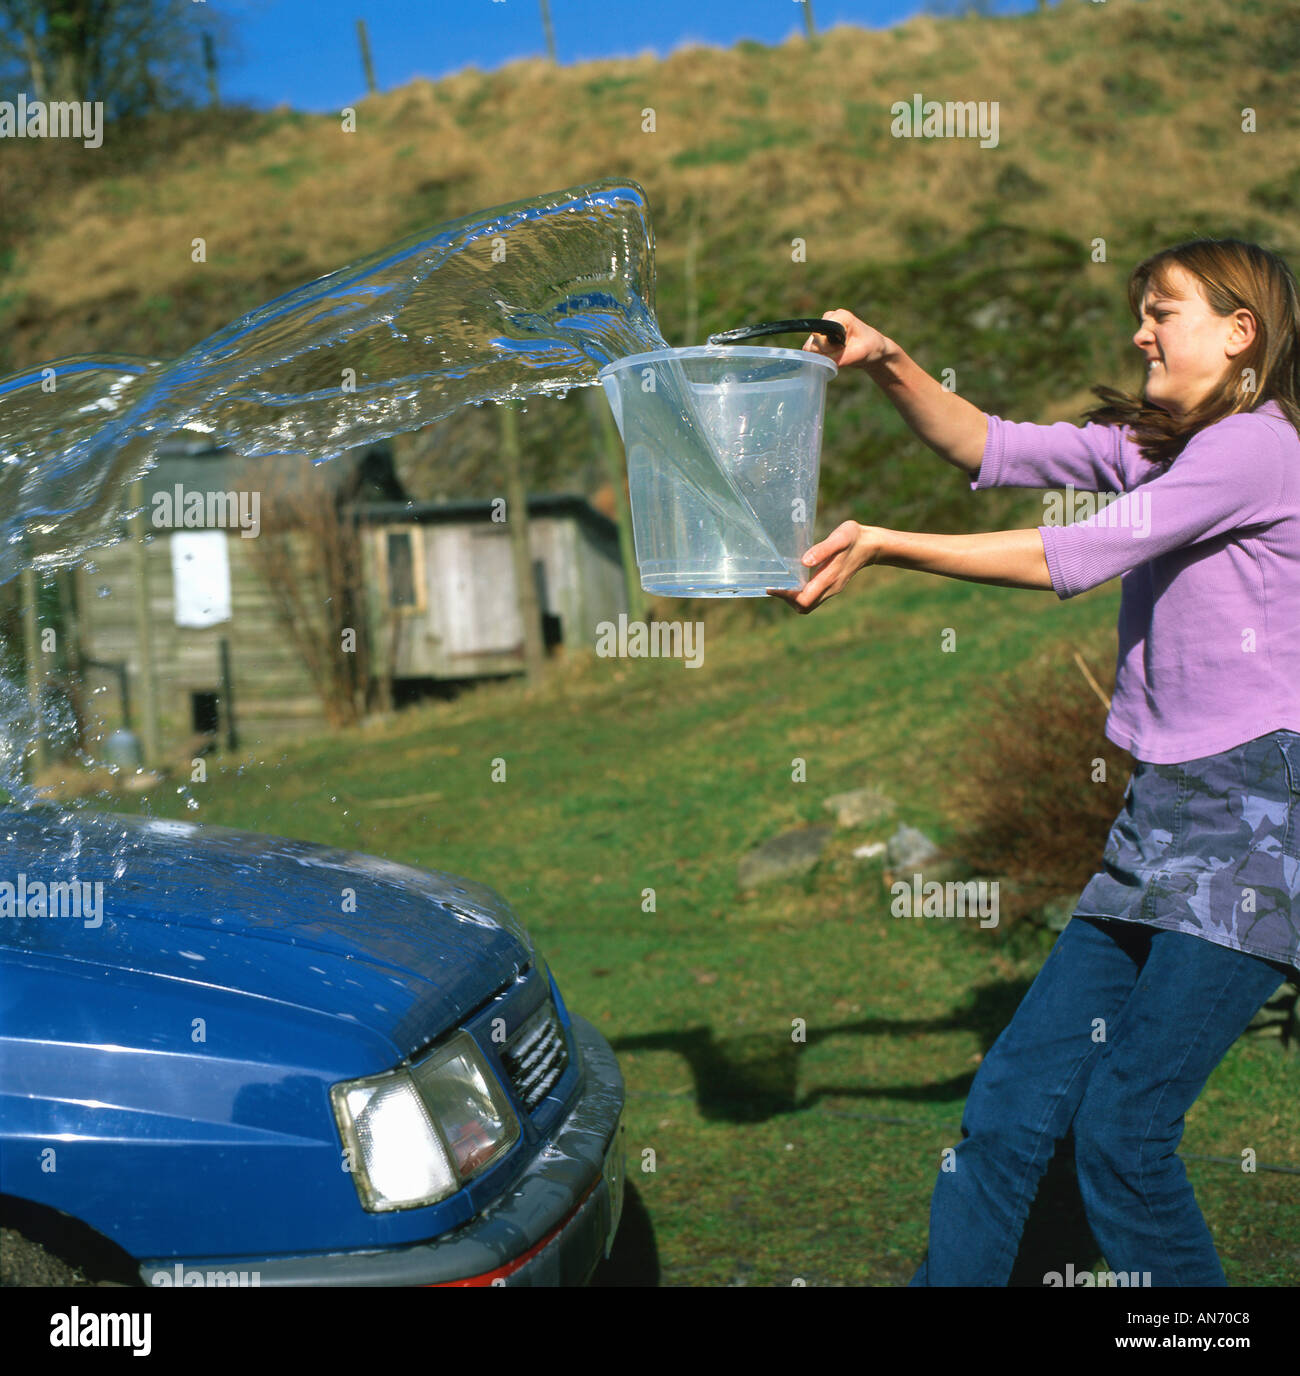 Teenage girl washing the car for pocket money allowance with a bucket of water Wales UK Stock Photo